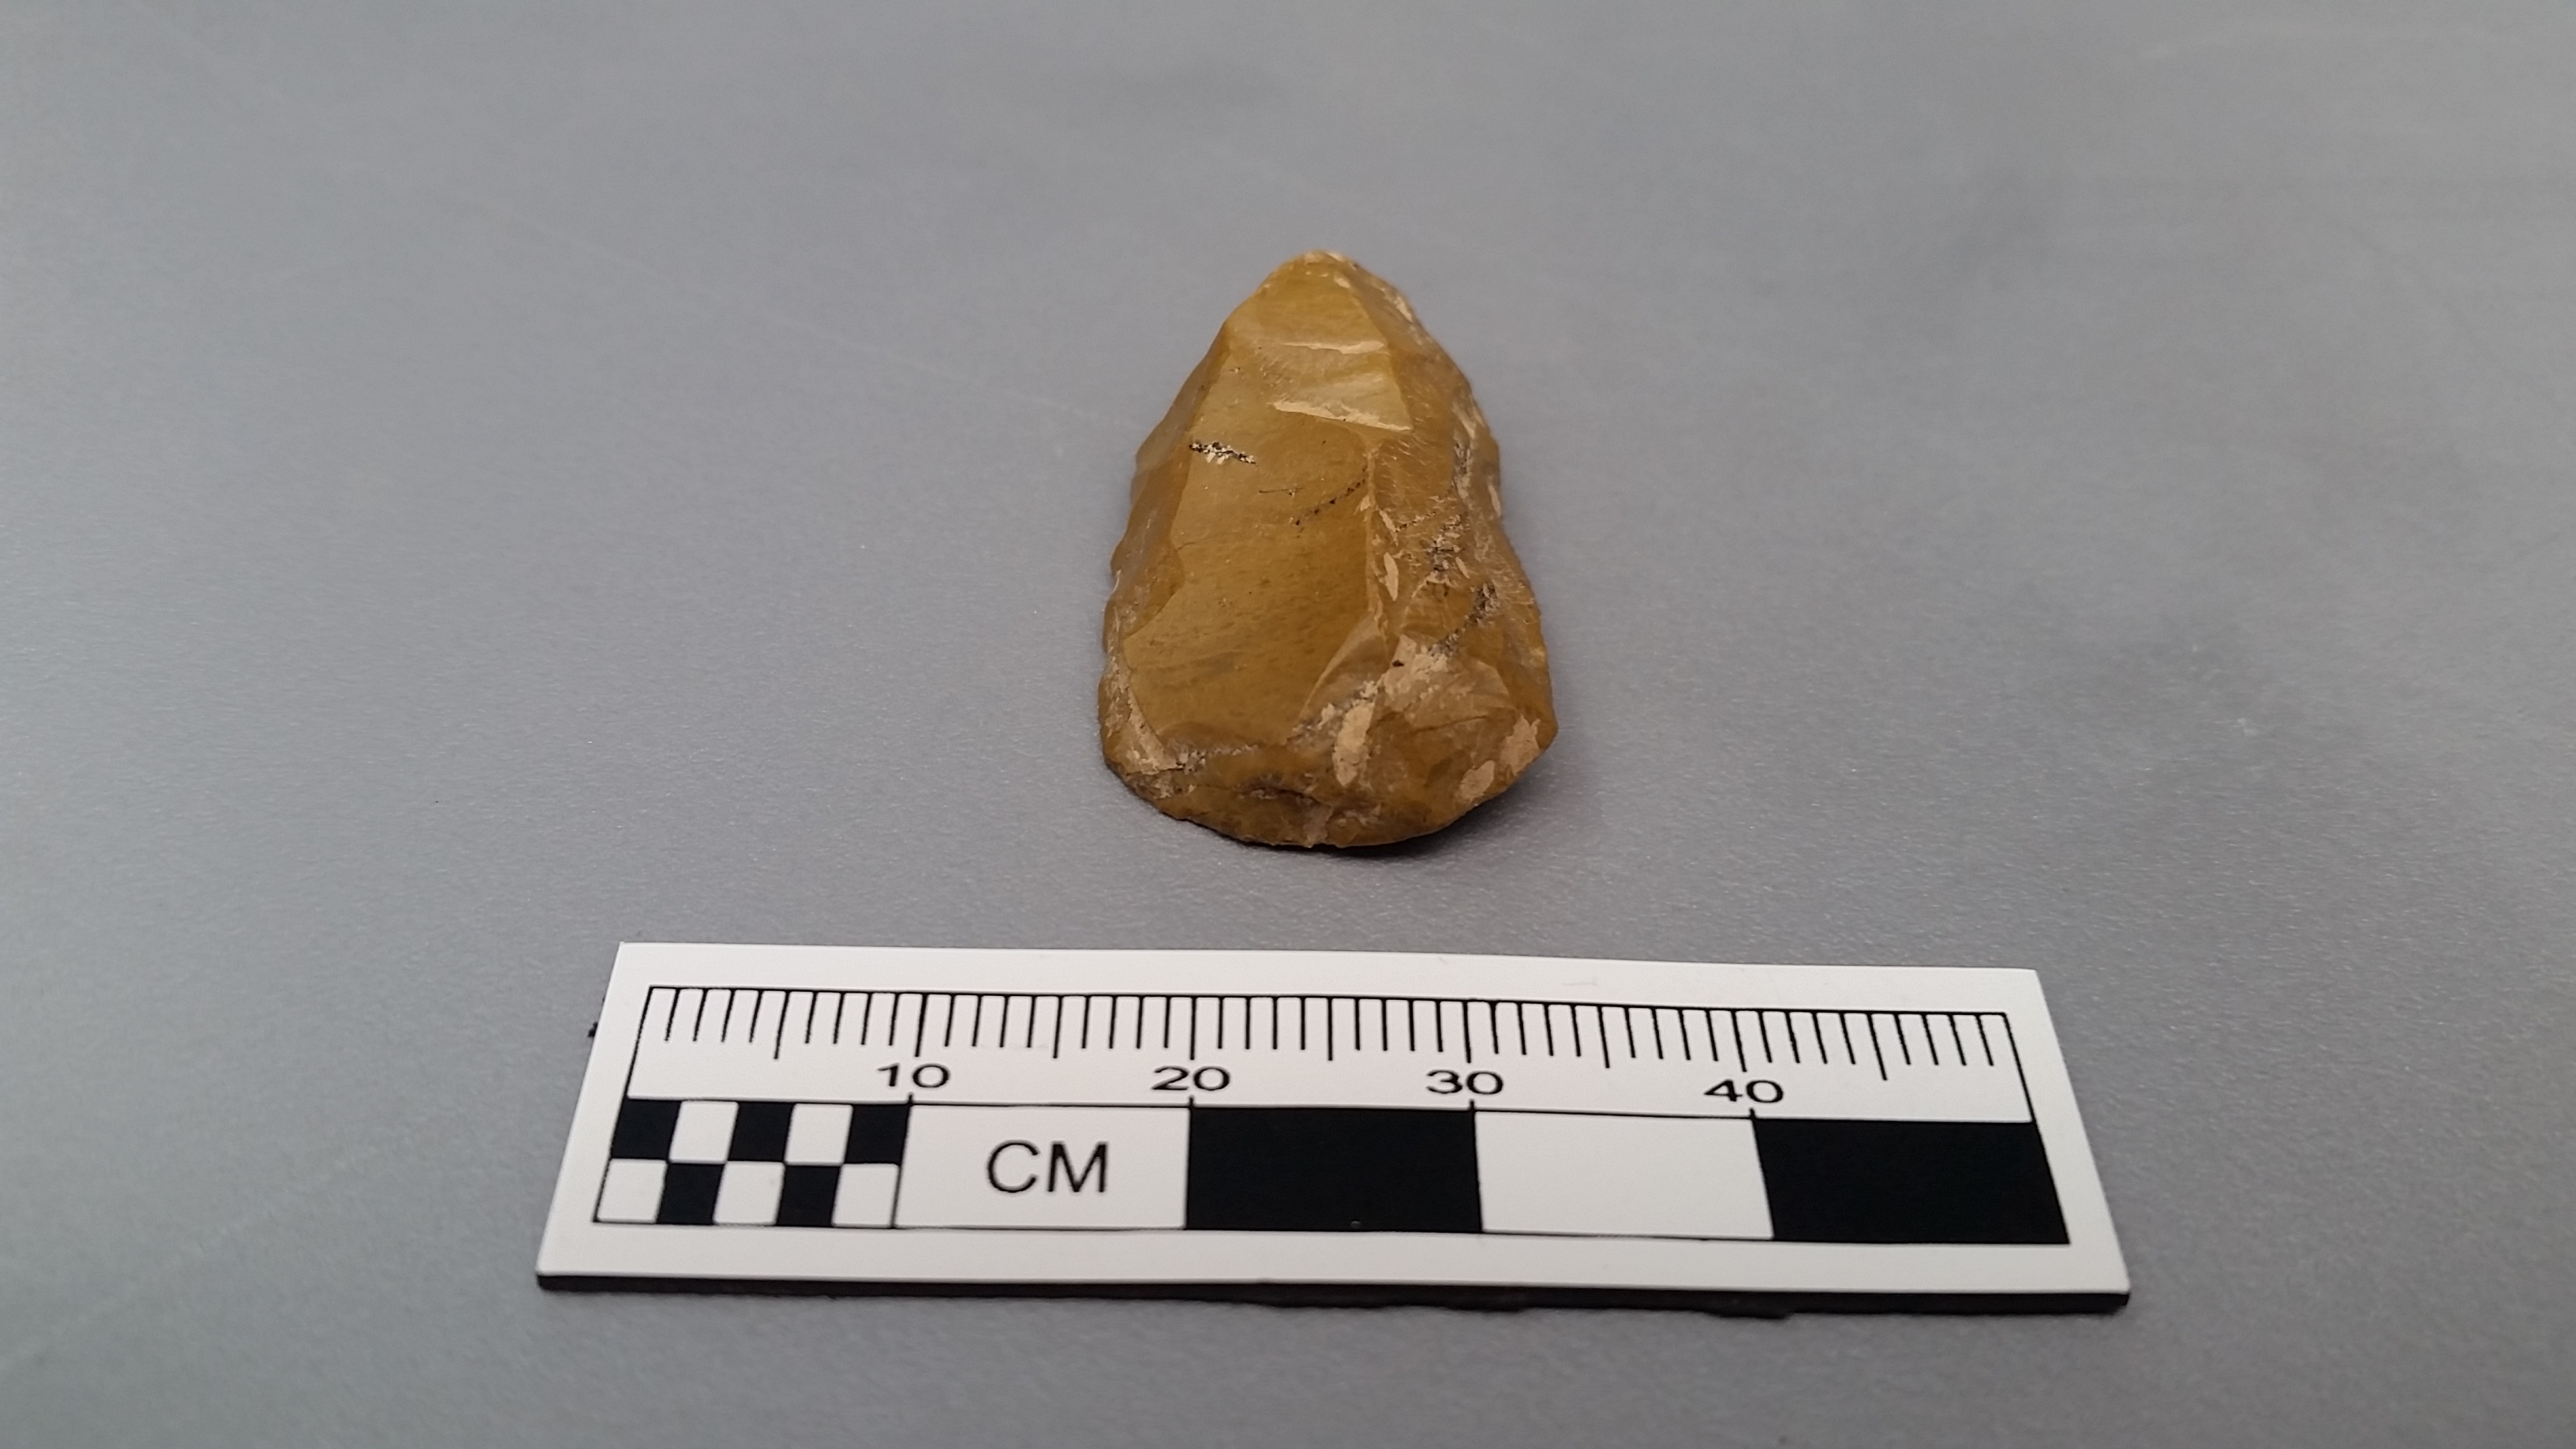 This photograph shows a tooled projectile point (arrow) measuring approximately 20 centimeters wide.